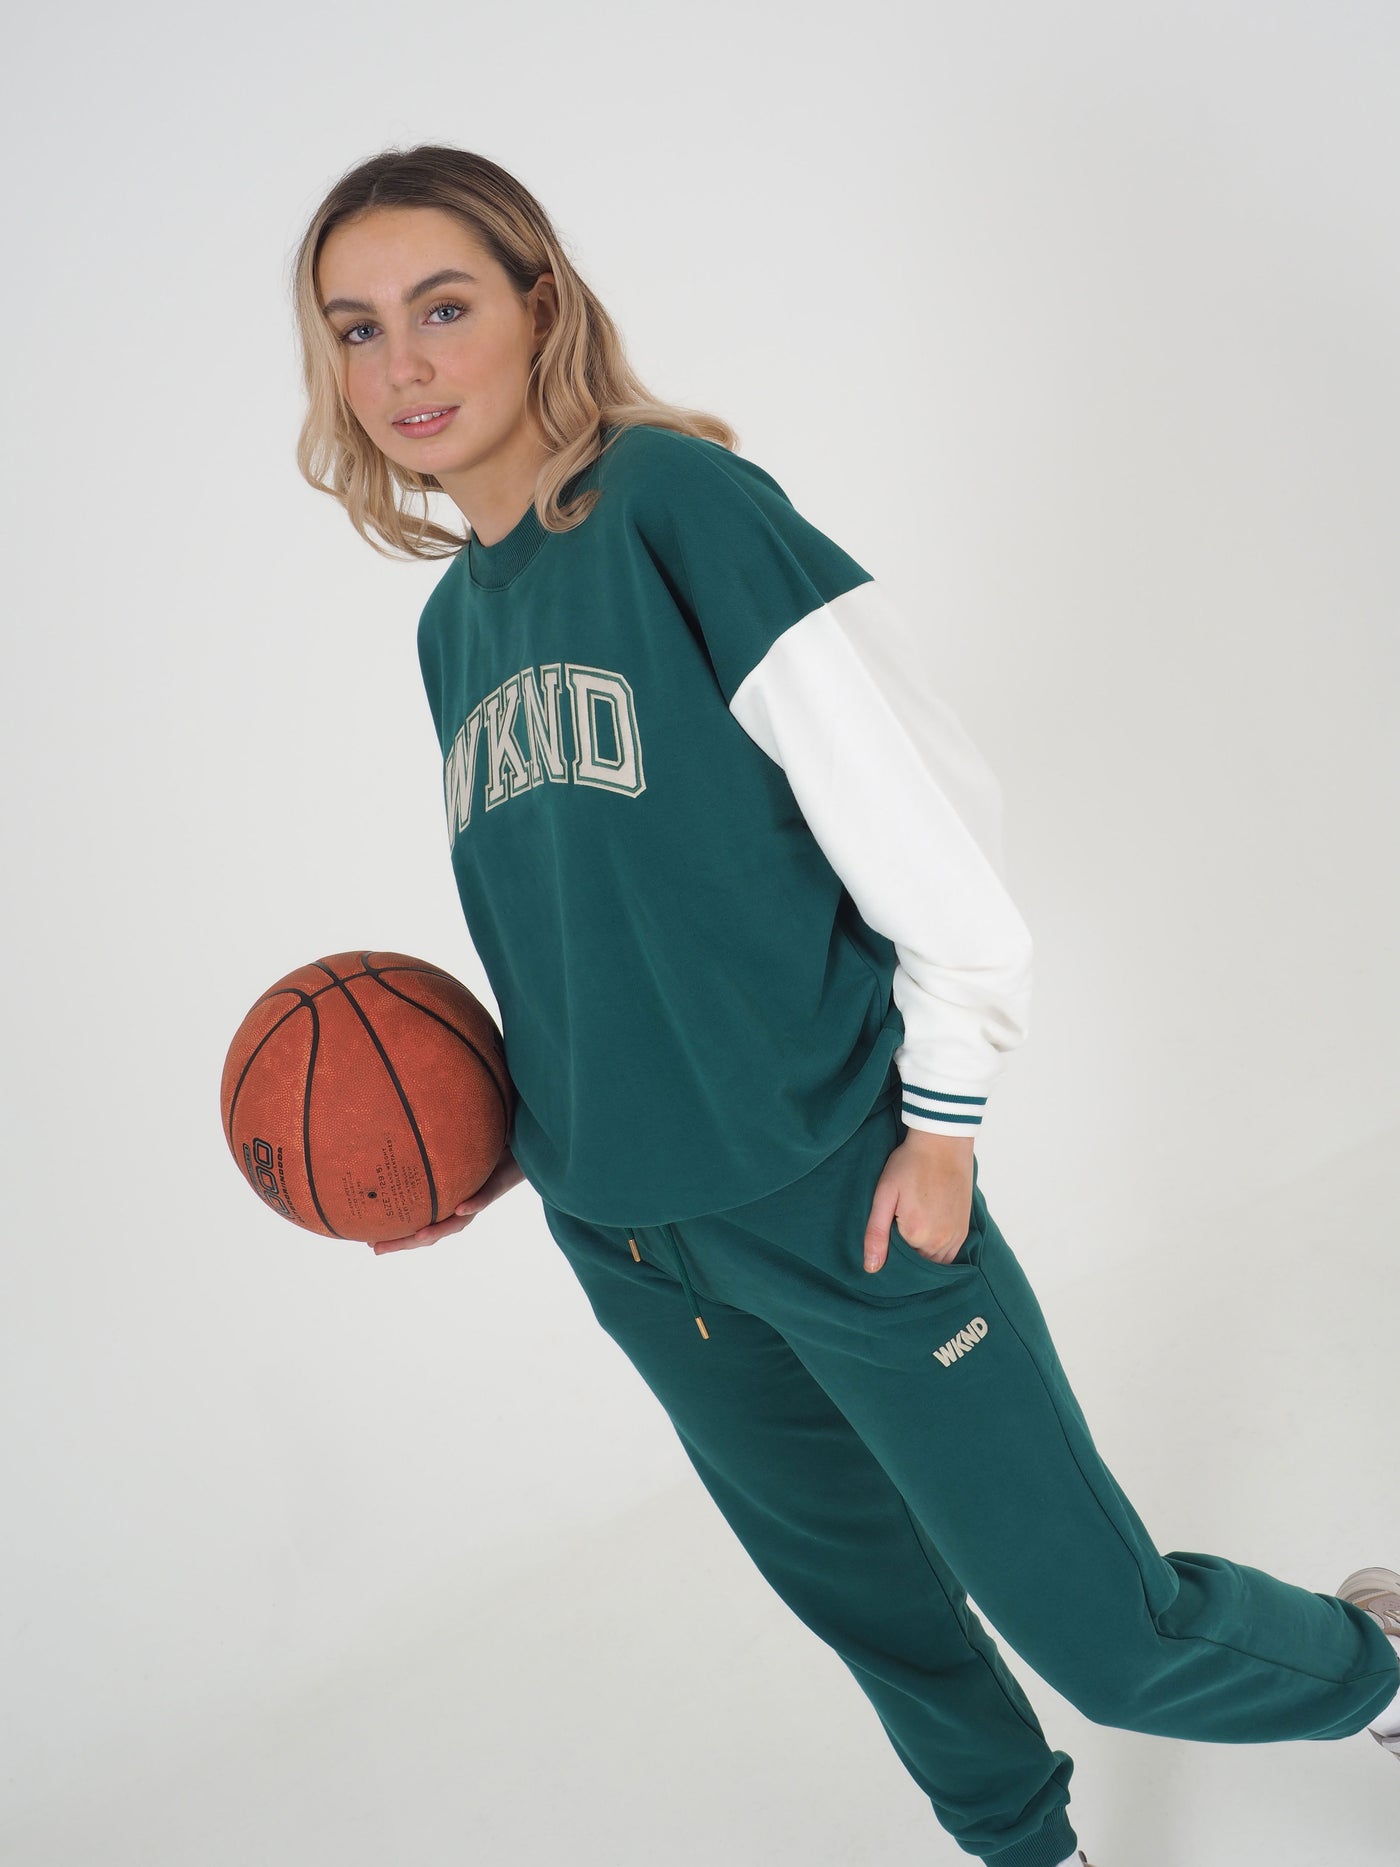 Model with blonde hair wearing a green college varsity style sweatshirt and matching joggers.  Sweatshirt has contrast white sleeves and the text reads WKND. Model is holding a basketball.